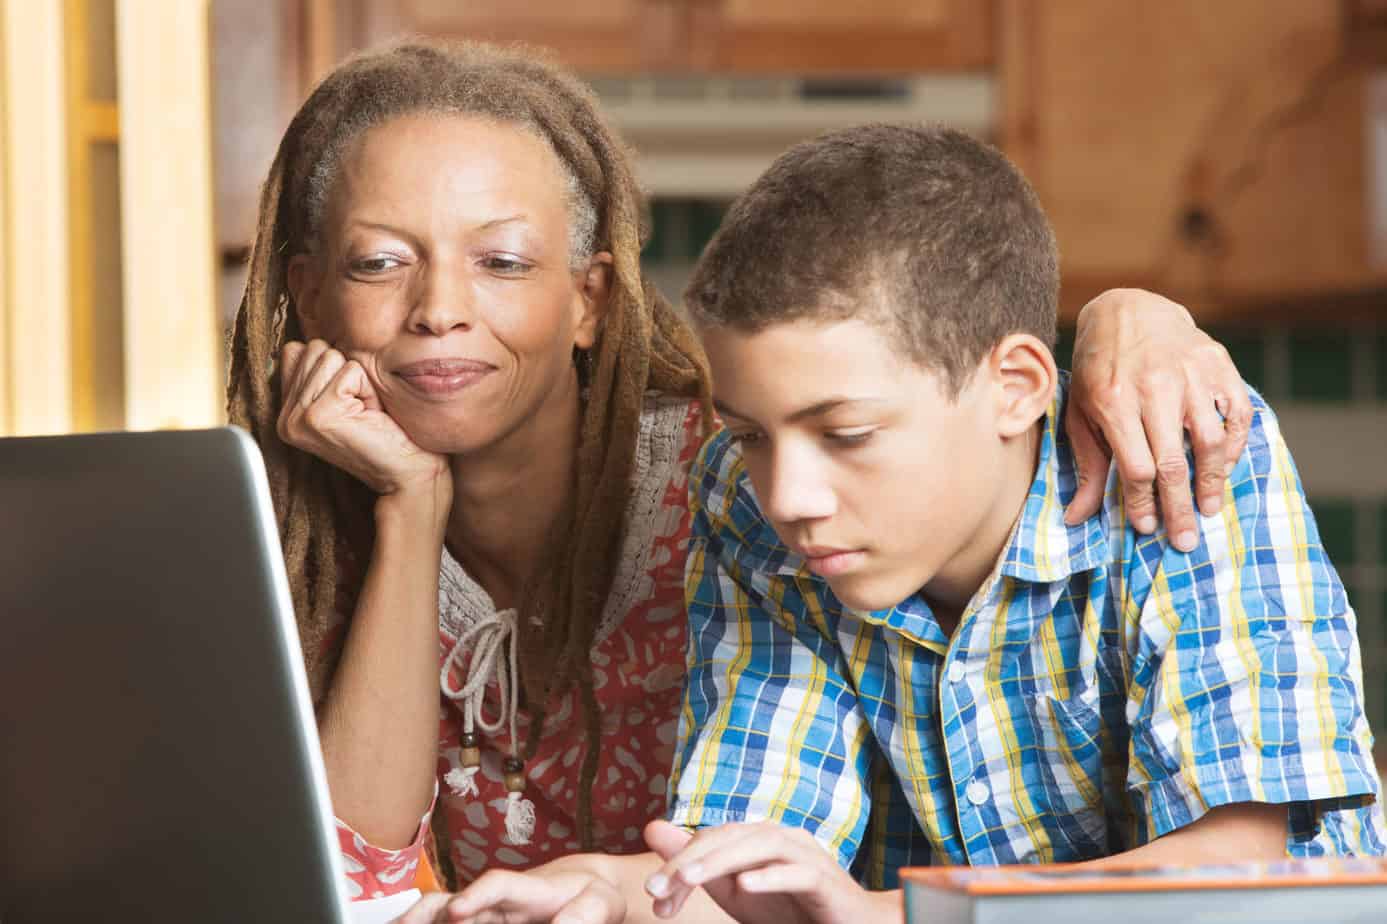 5 Tips for Talking with Your Kids About Parental Control Apps